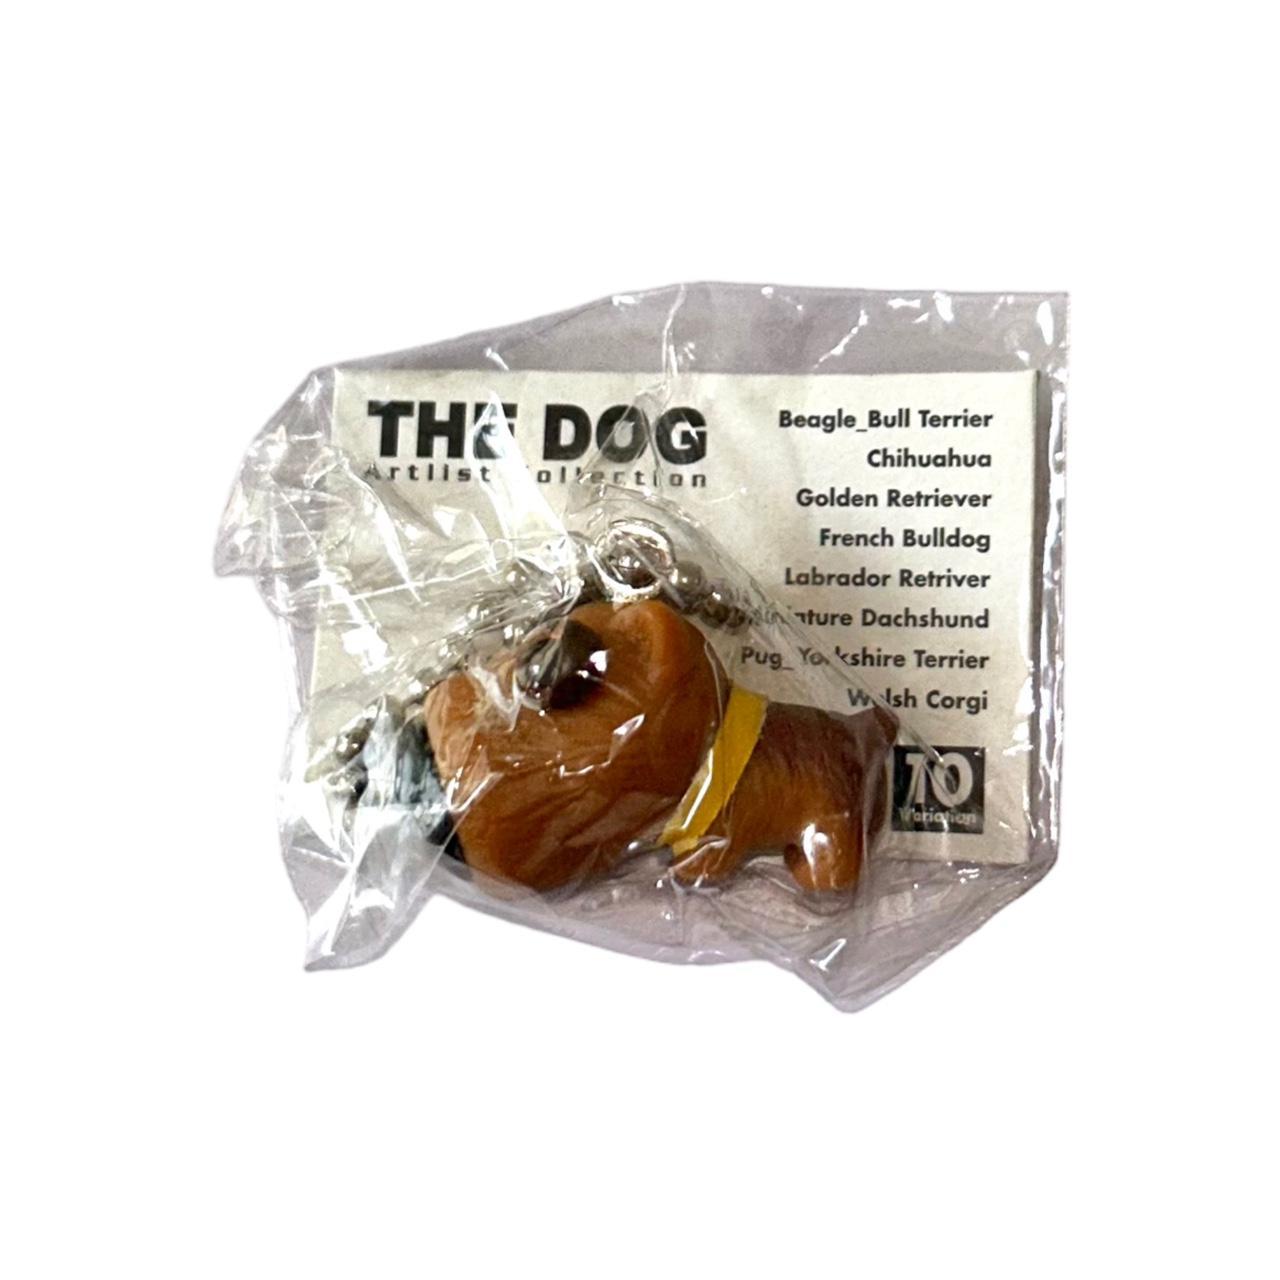 Y2K the dog keychain figure, Puppy has a yellow